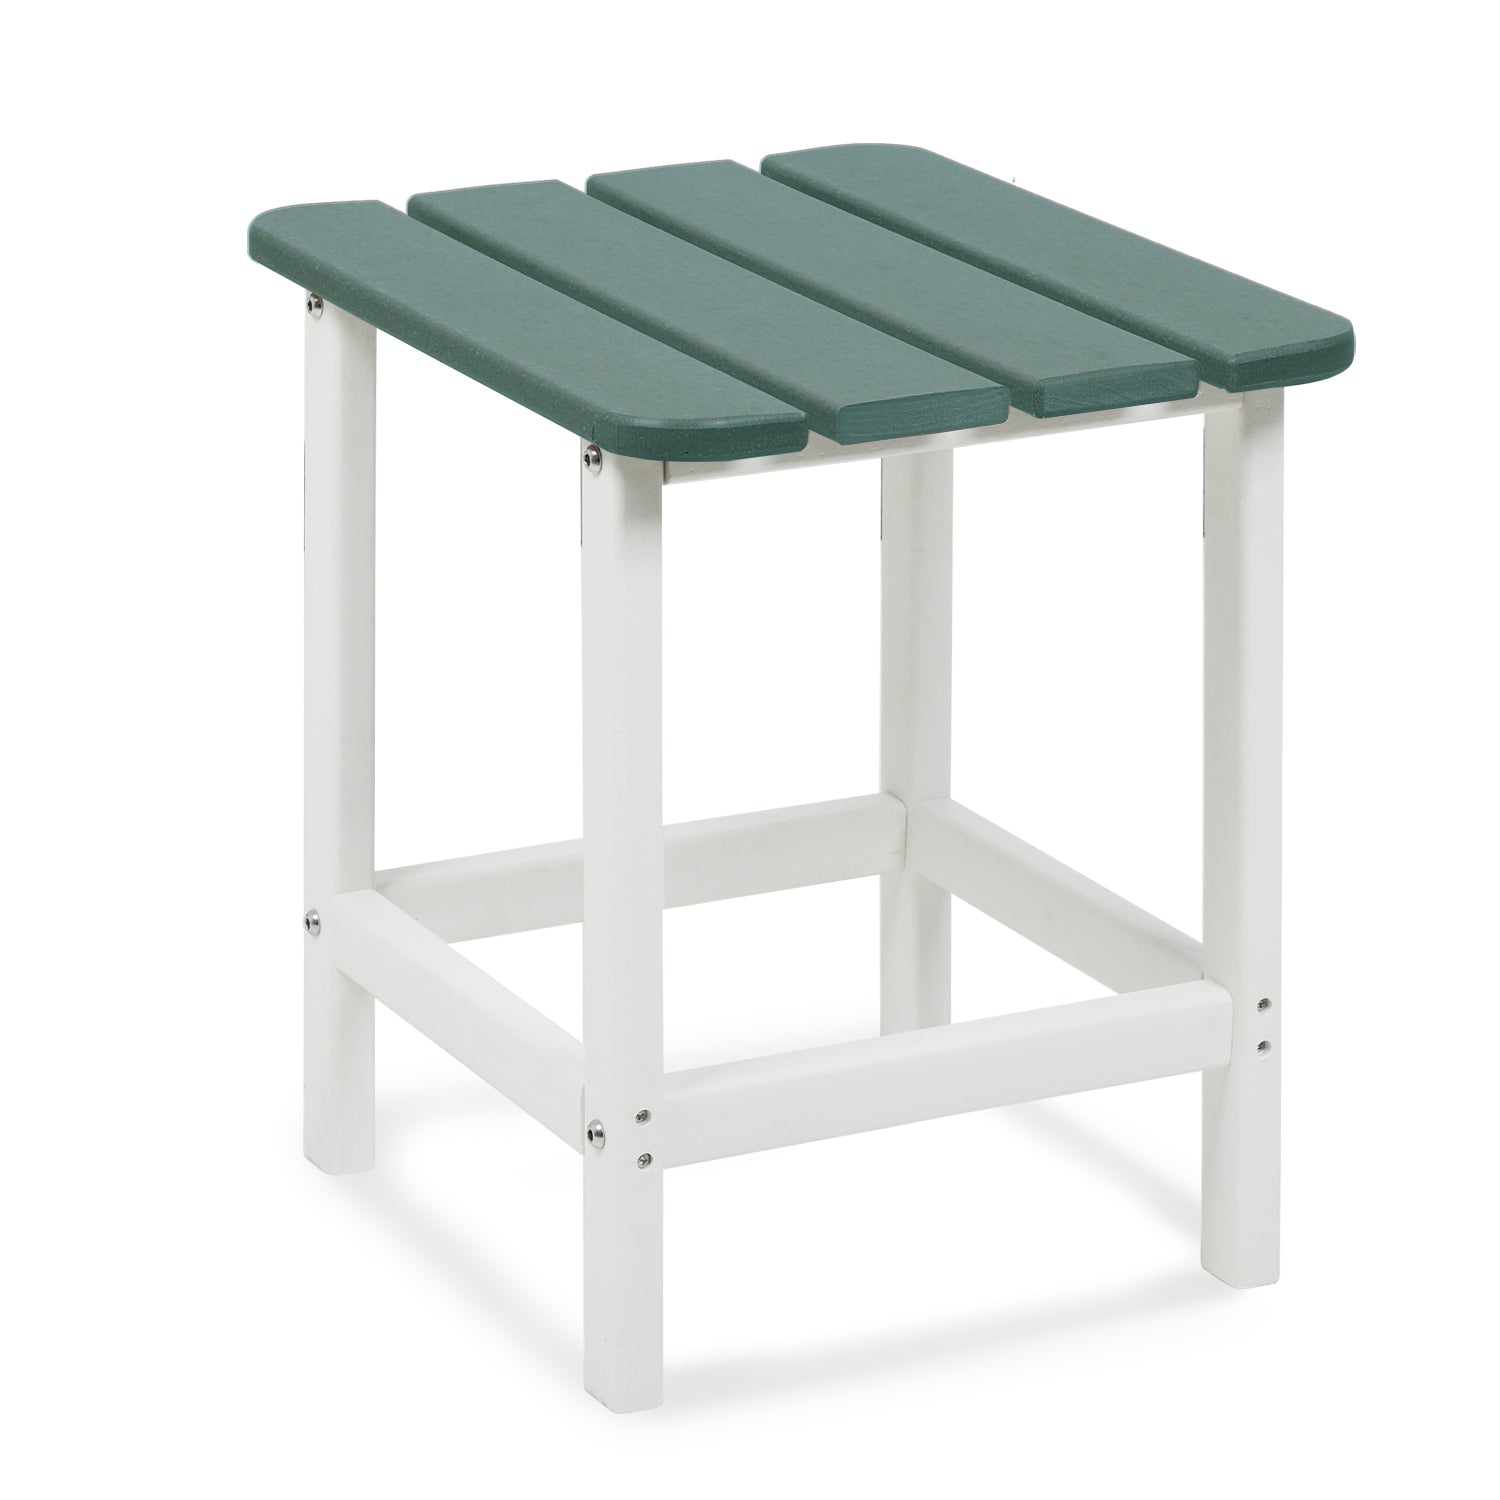 Outdoor Side Table, Square Adirondack Patio End Table for Patio, Pool, Porch Furniture Aoodor Green  